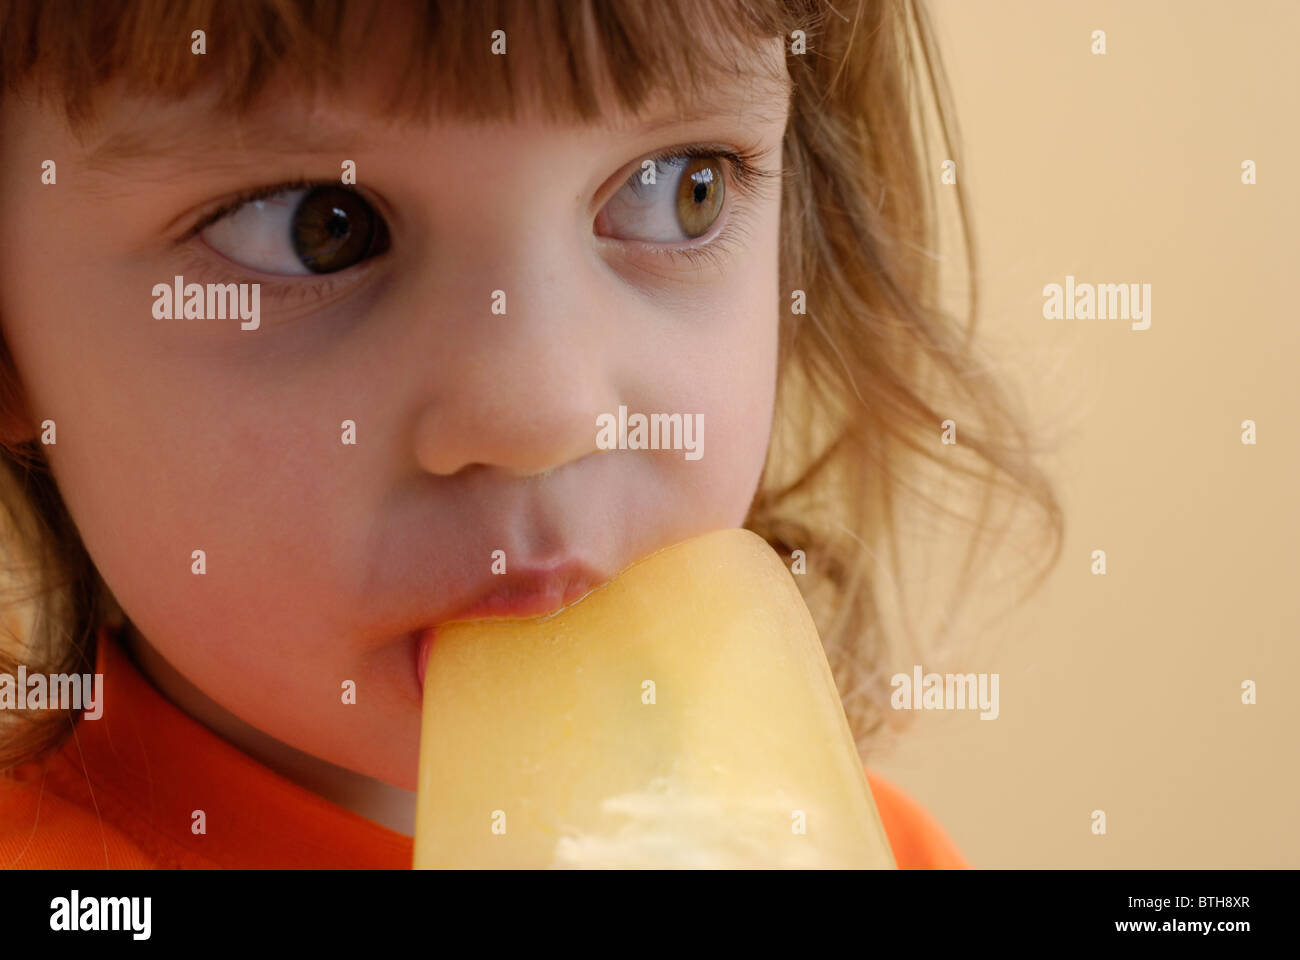 Three year old girl eating an orange ice lolly. Stock Photo